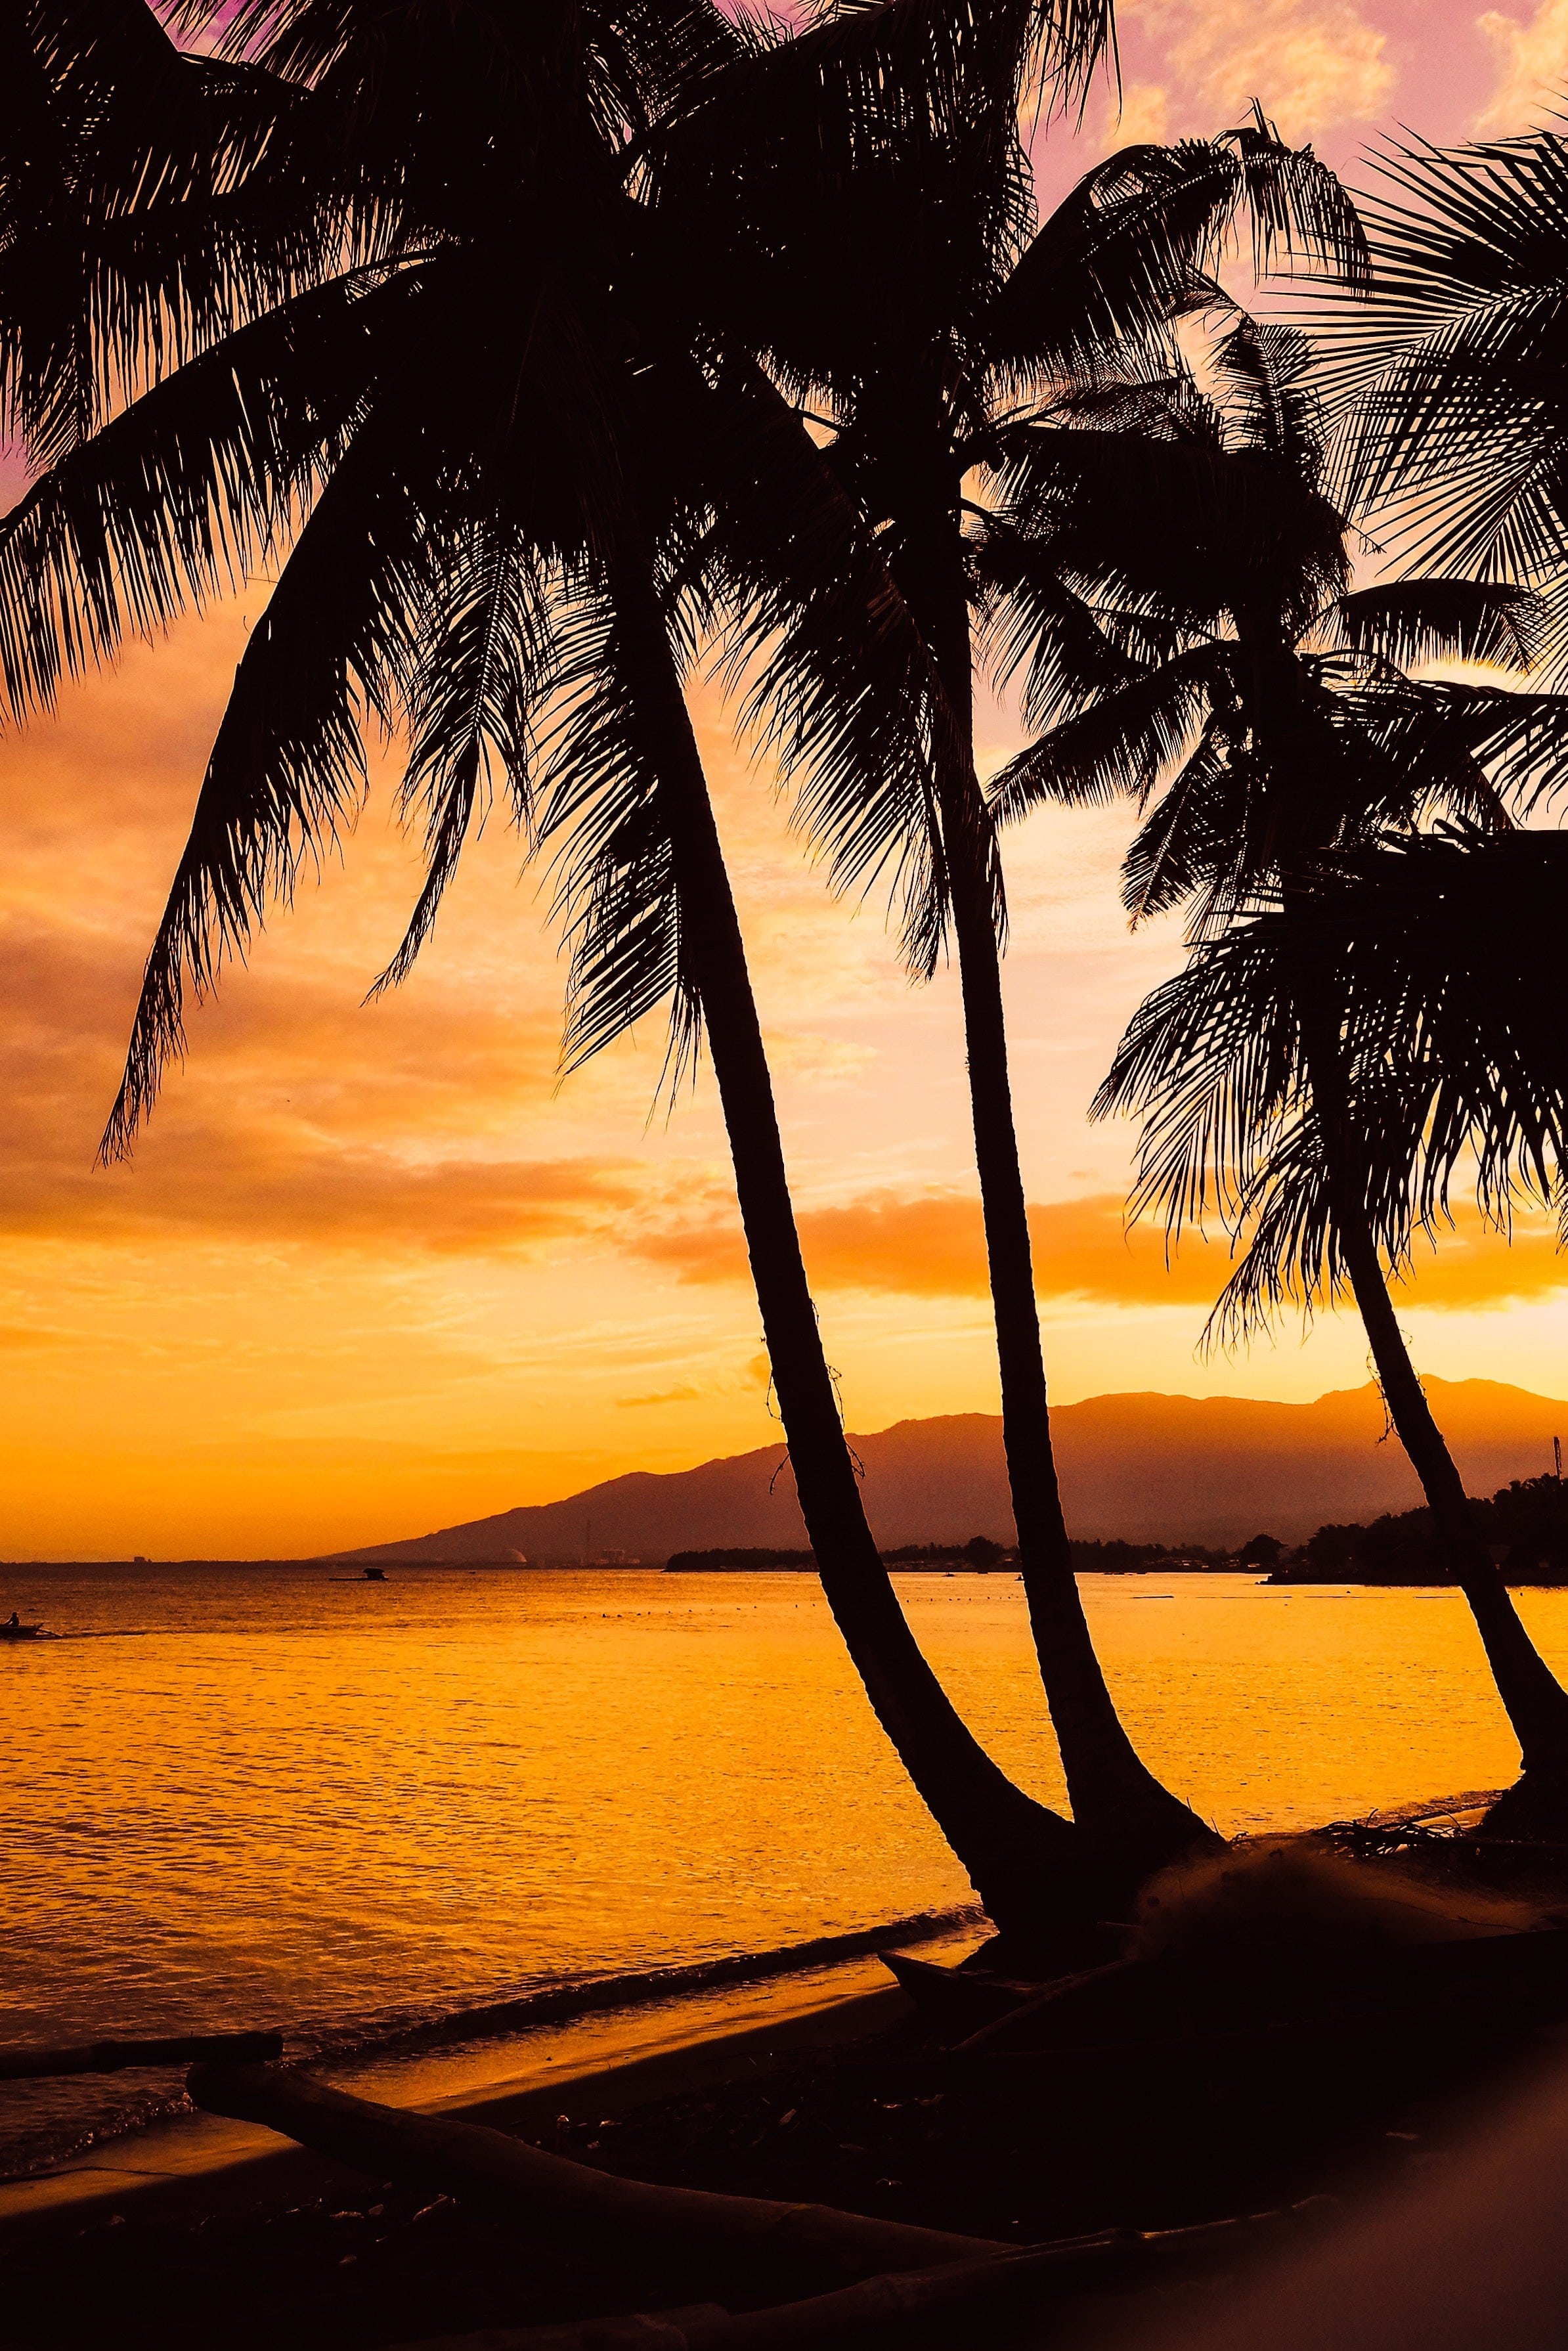 Capture the serenity of a beach sunset, where palm trees sway in the gentle breeze. Let DREW TRAVEL paint your perfect evening.